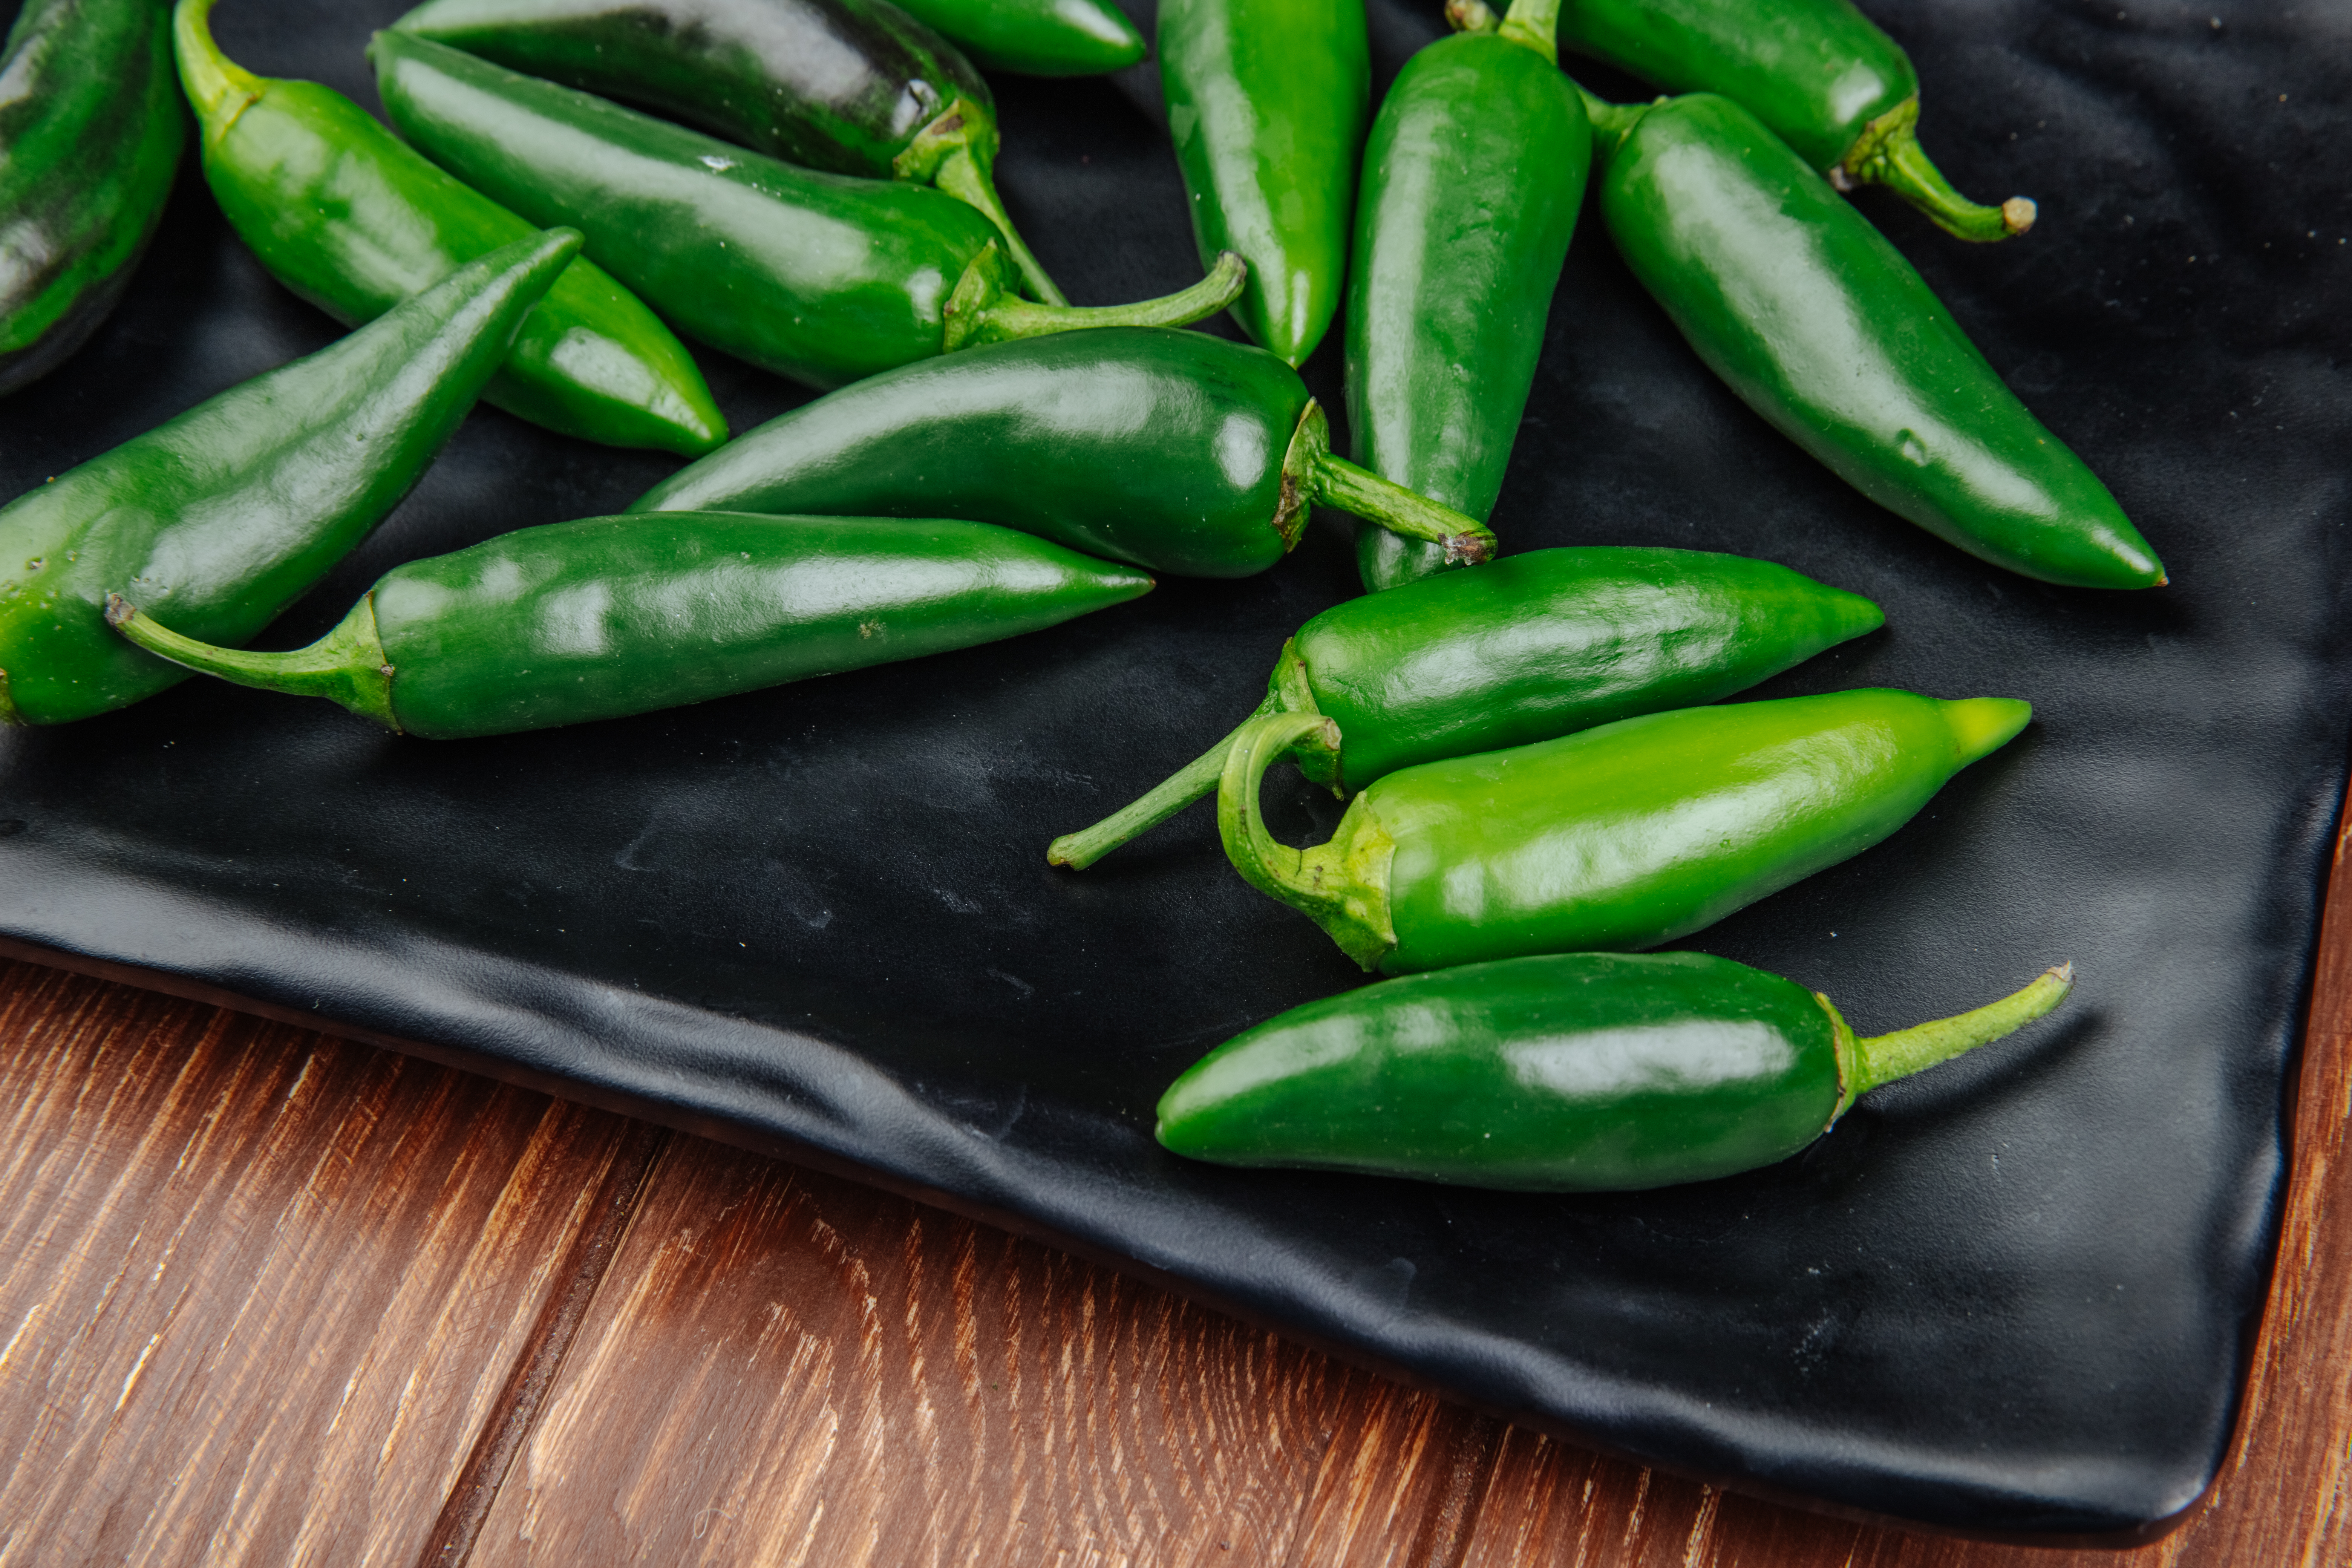 Green jalapeno peppers on a black dish with a wooden background